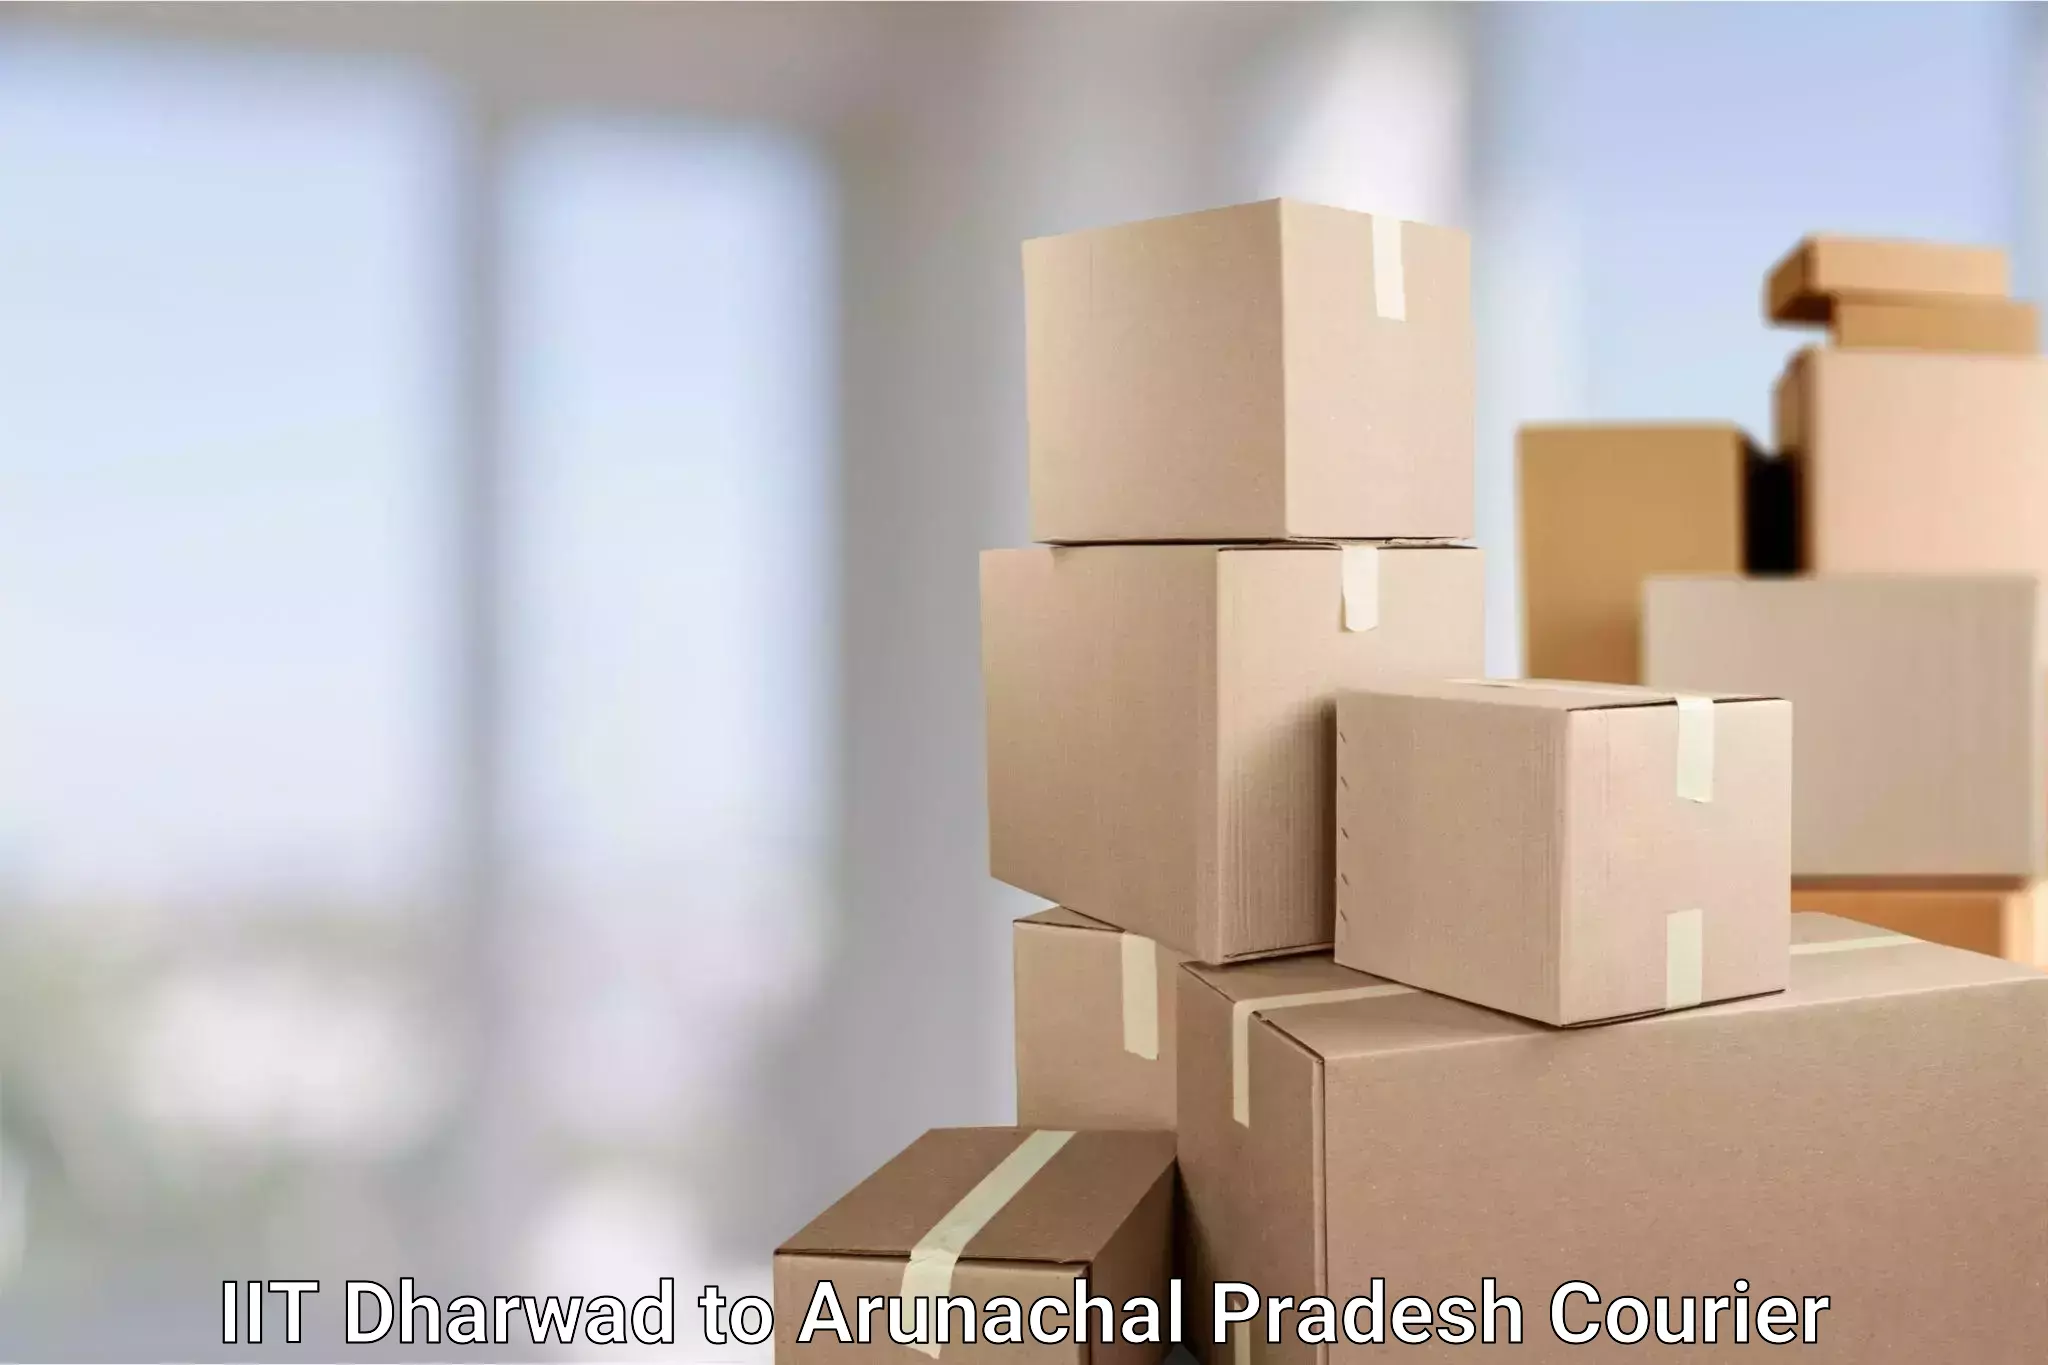 Express mail solutions IIT Dharwad to Kharsang